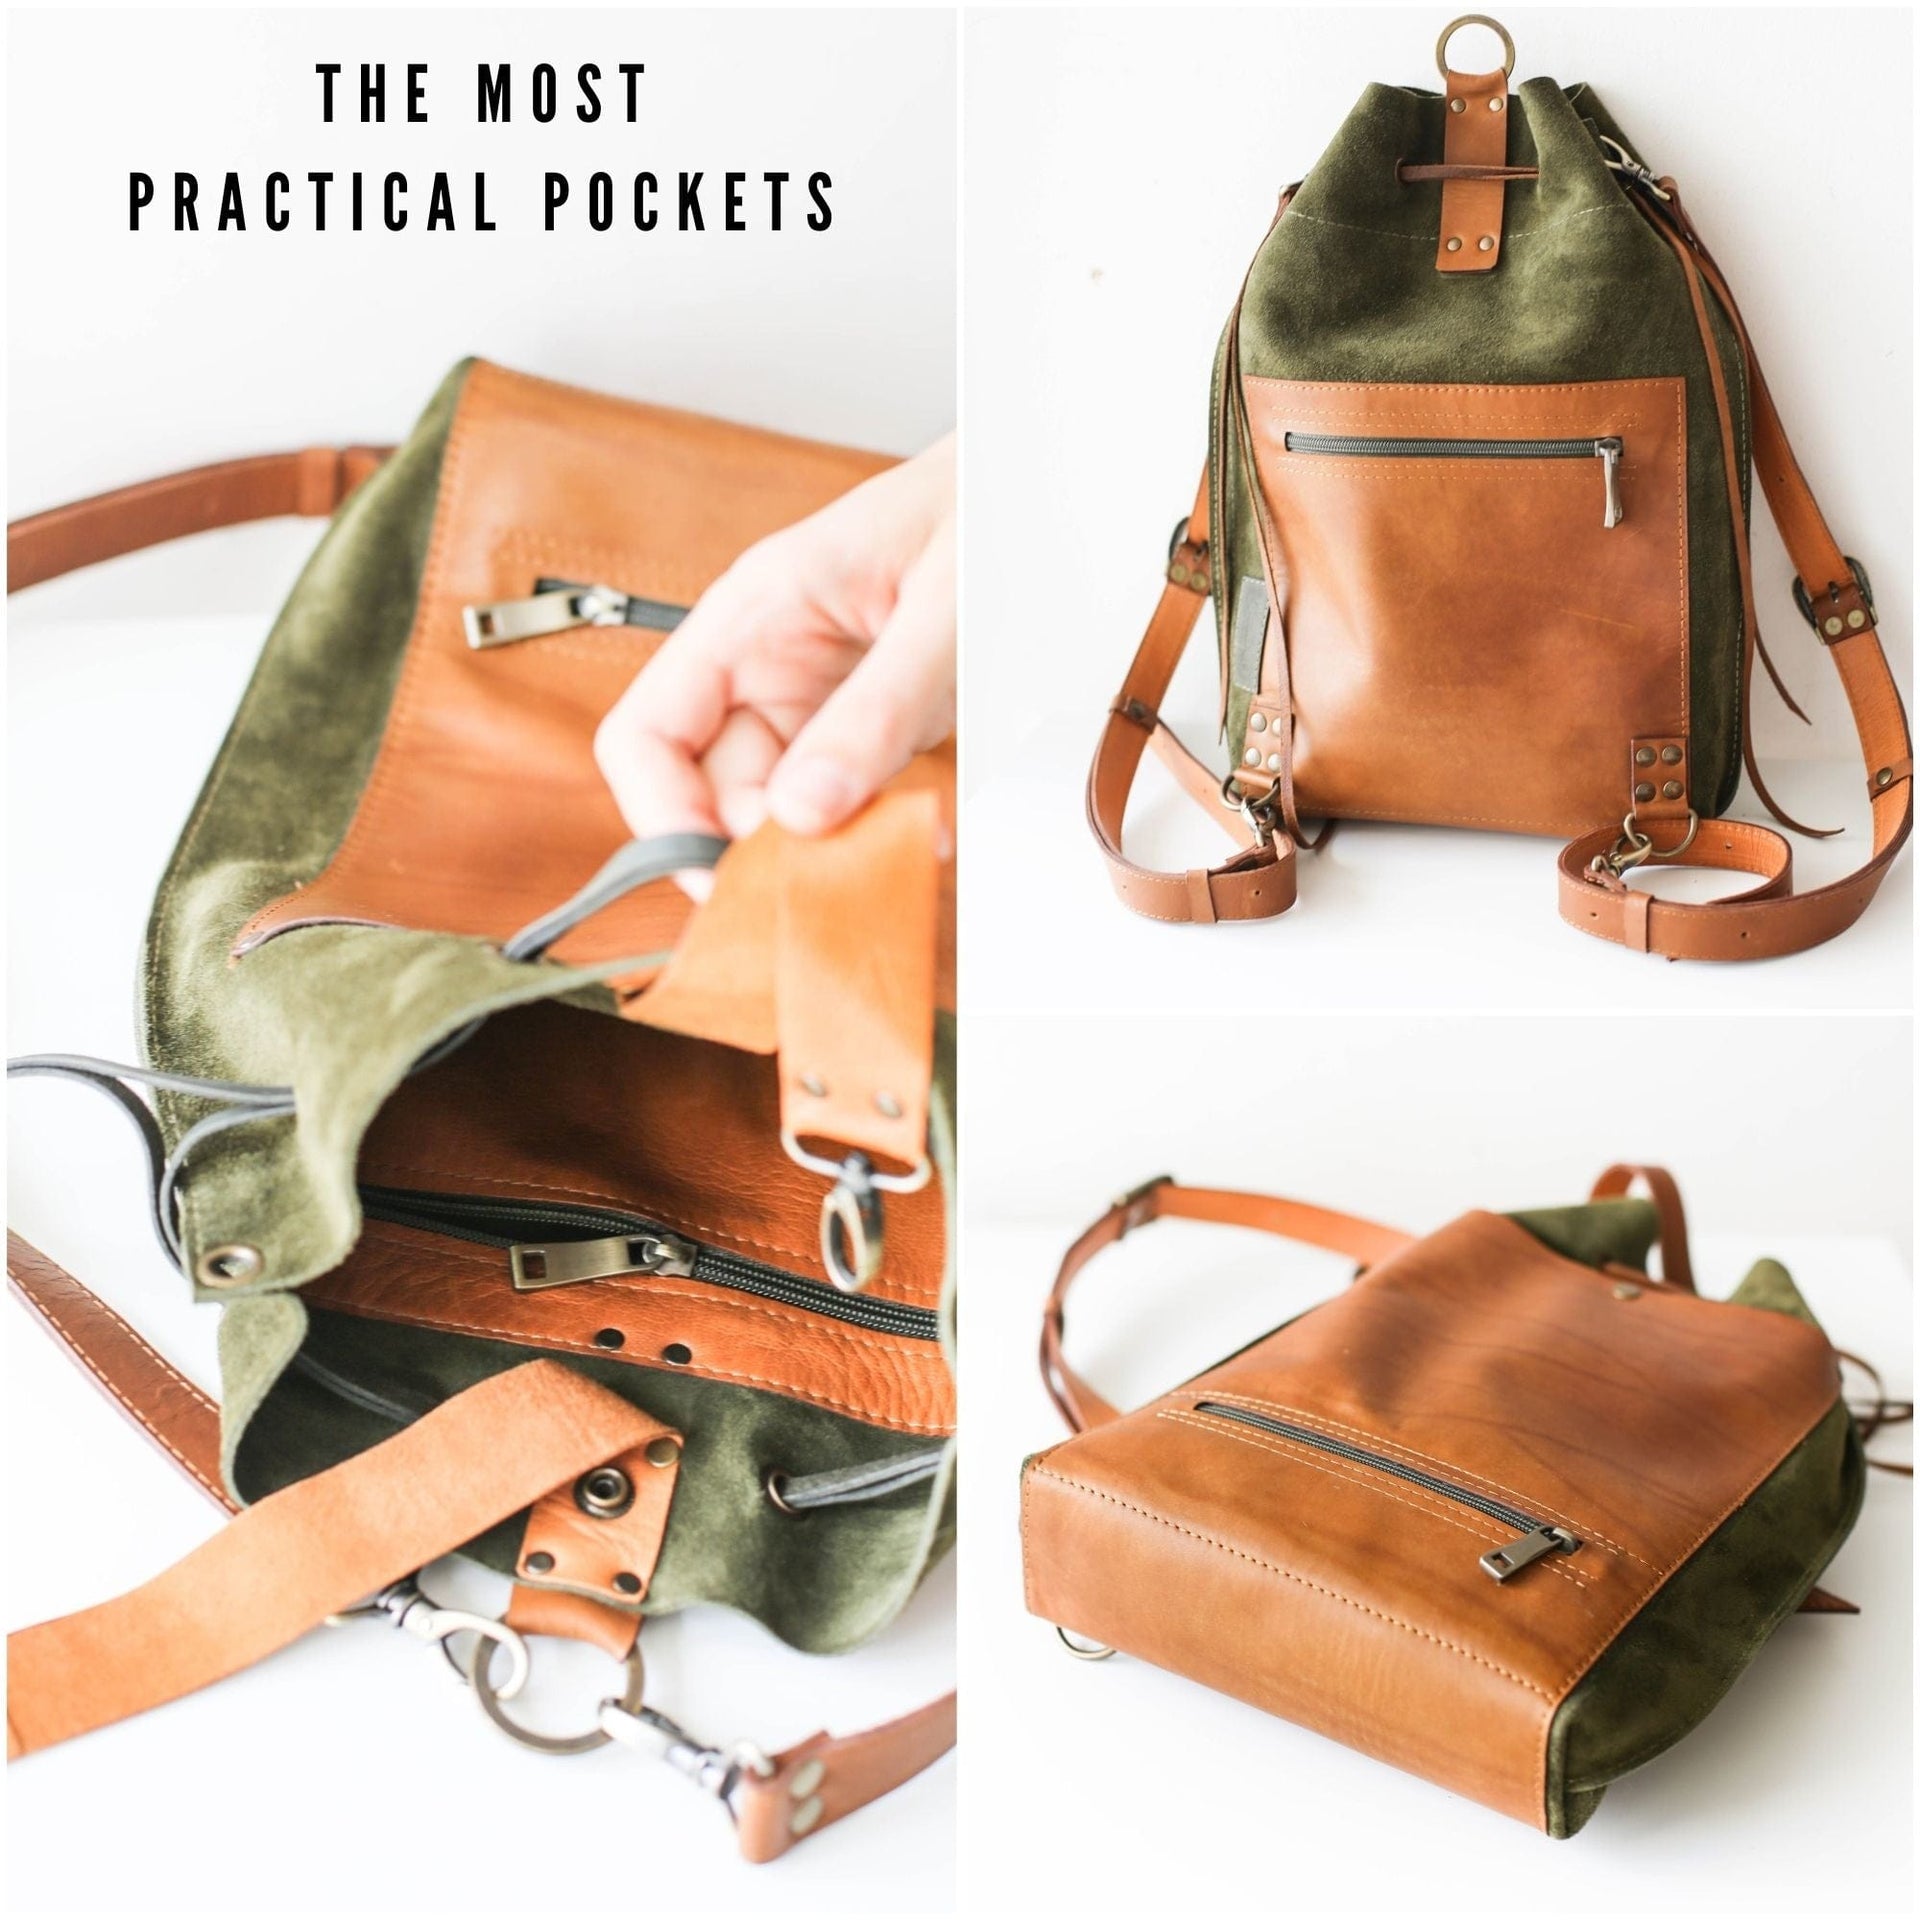 Leather Backpack Purses